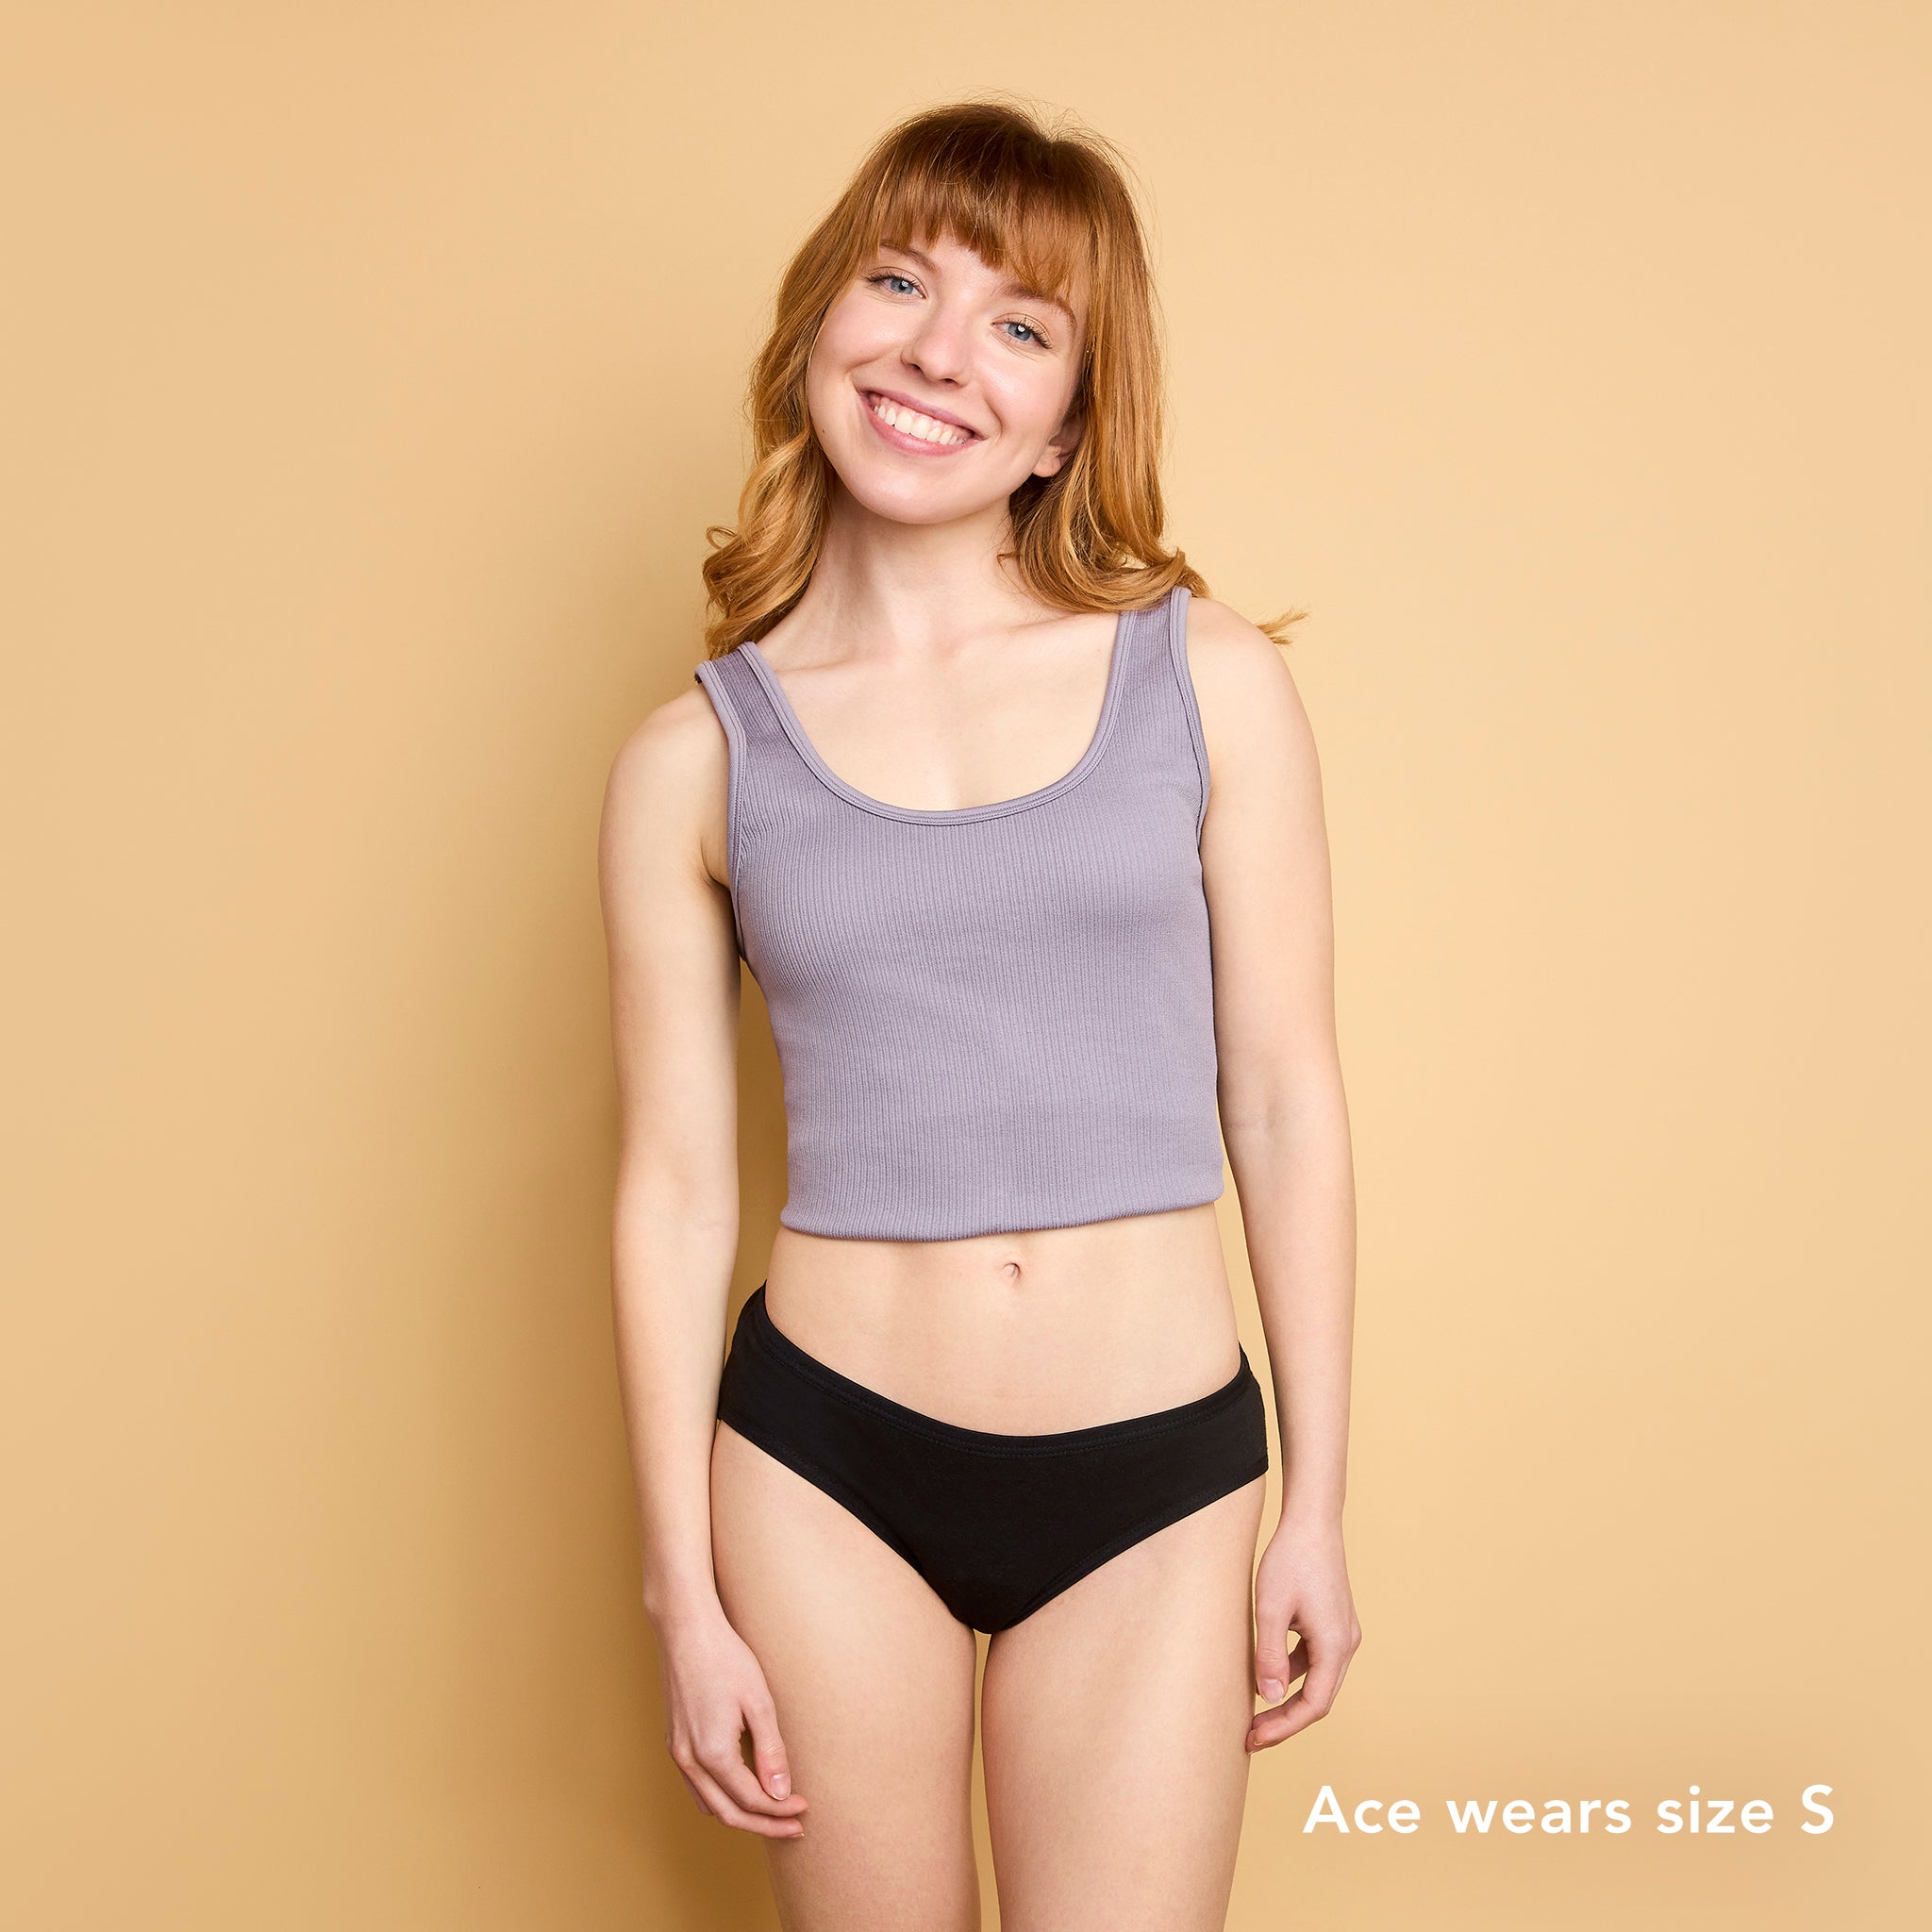 Rael: New! Period underwear for the overnight shift